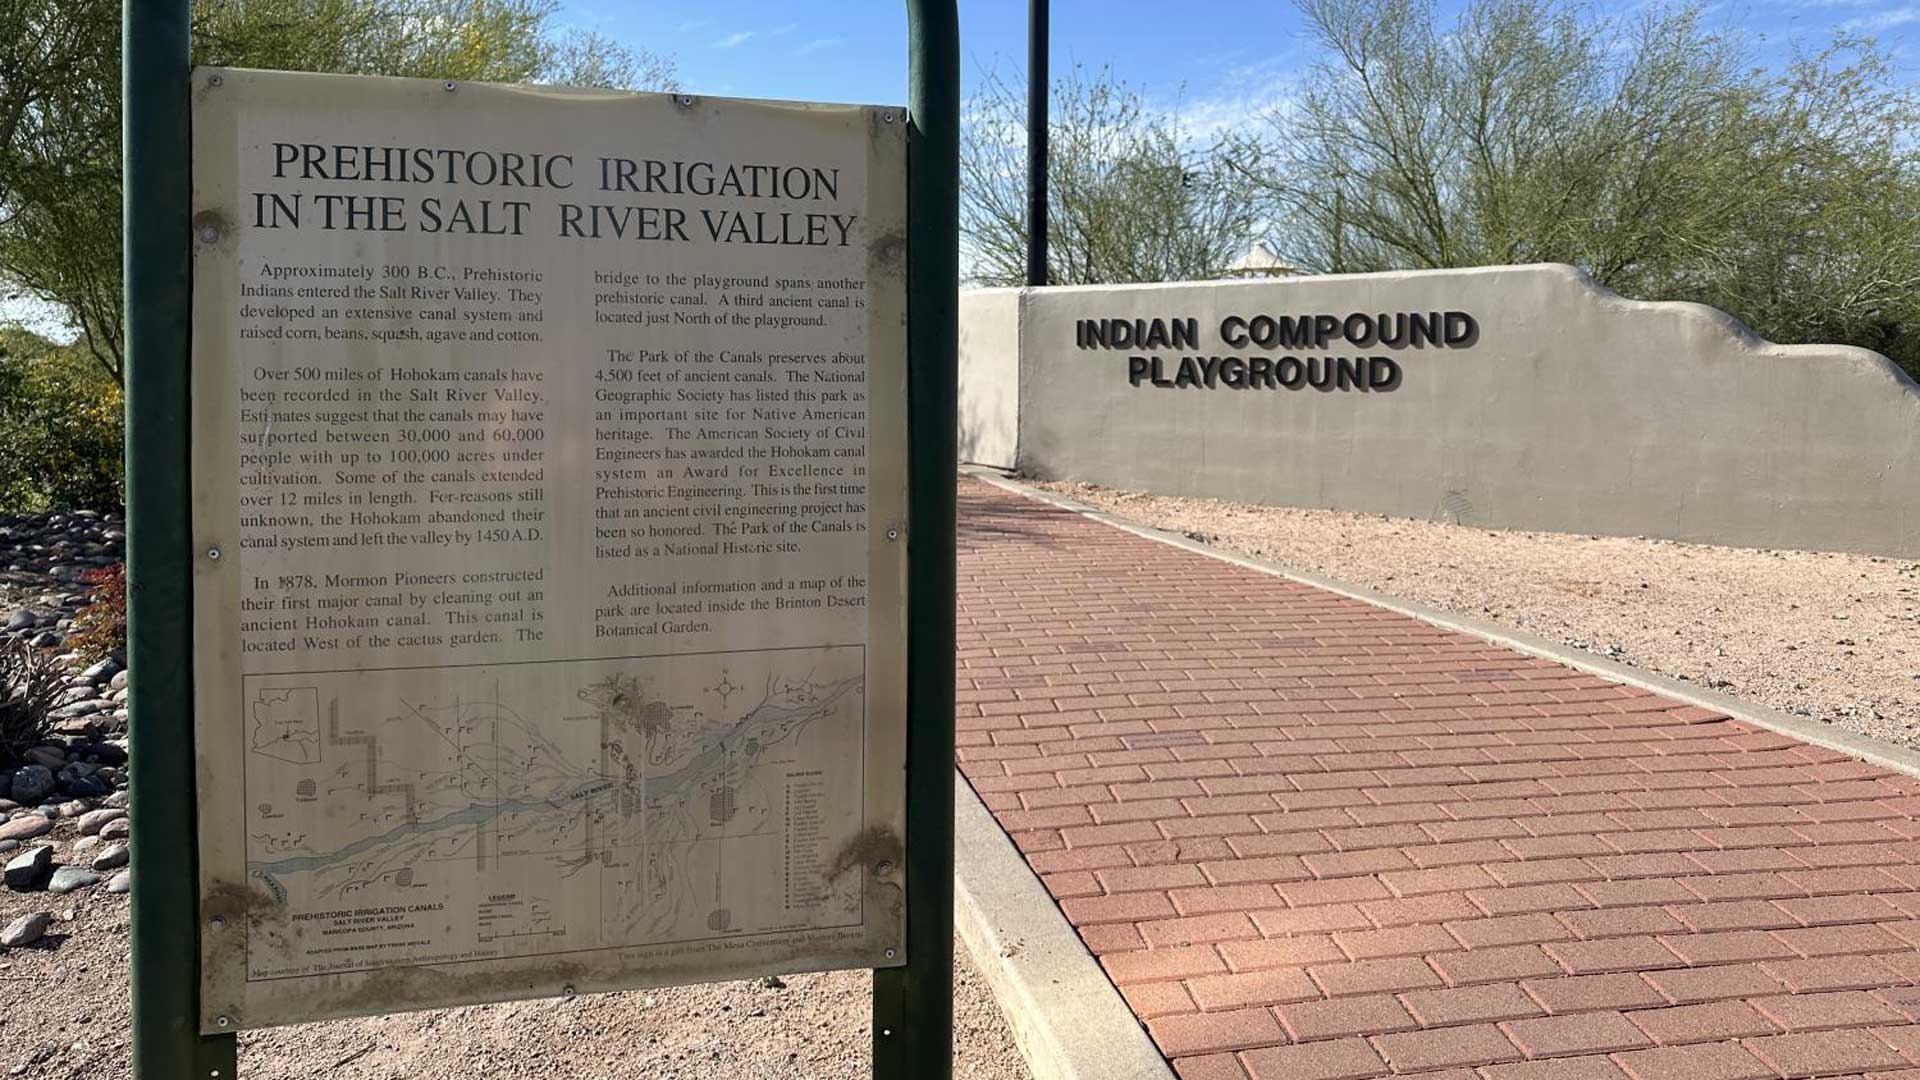 A marker at the Park of the Canals in Mesa shows a map of the ancient canal system dug by the ancestral Sonoran Desert people.